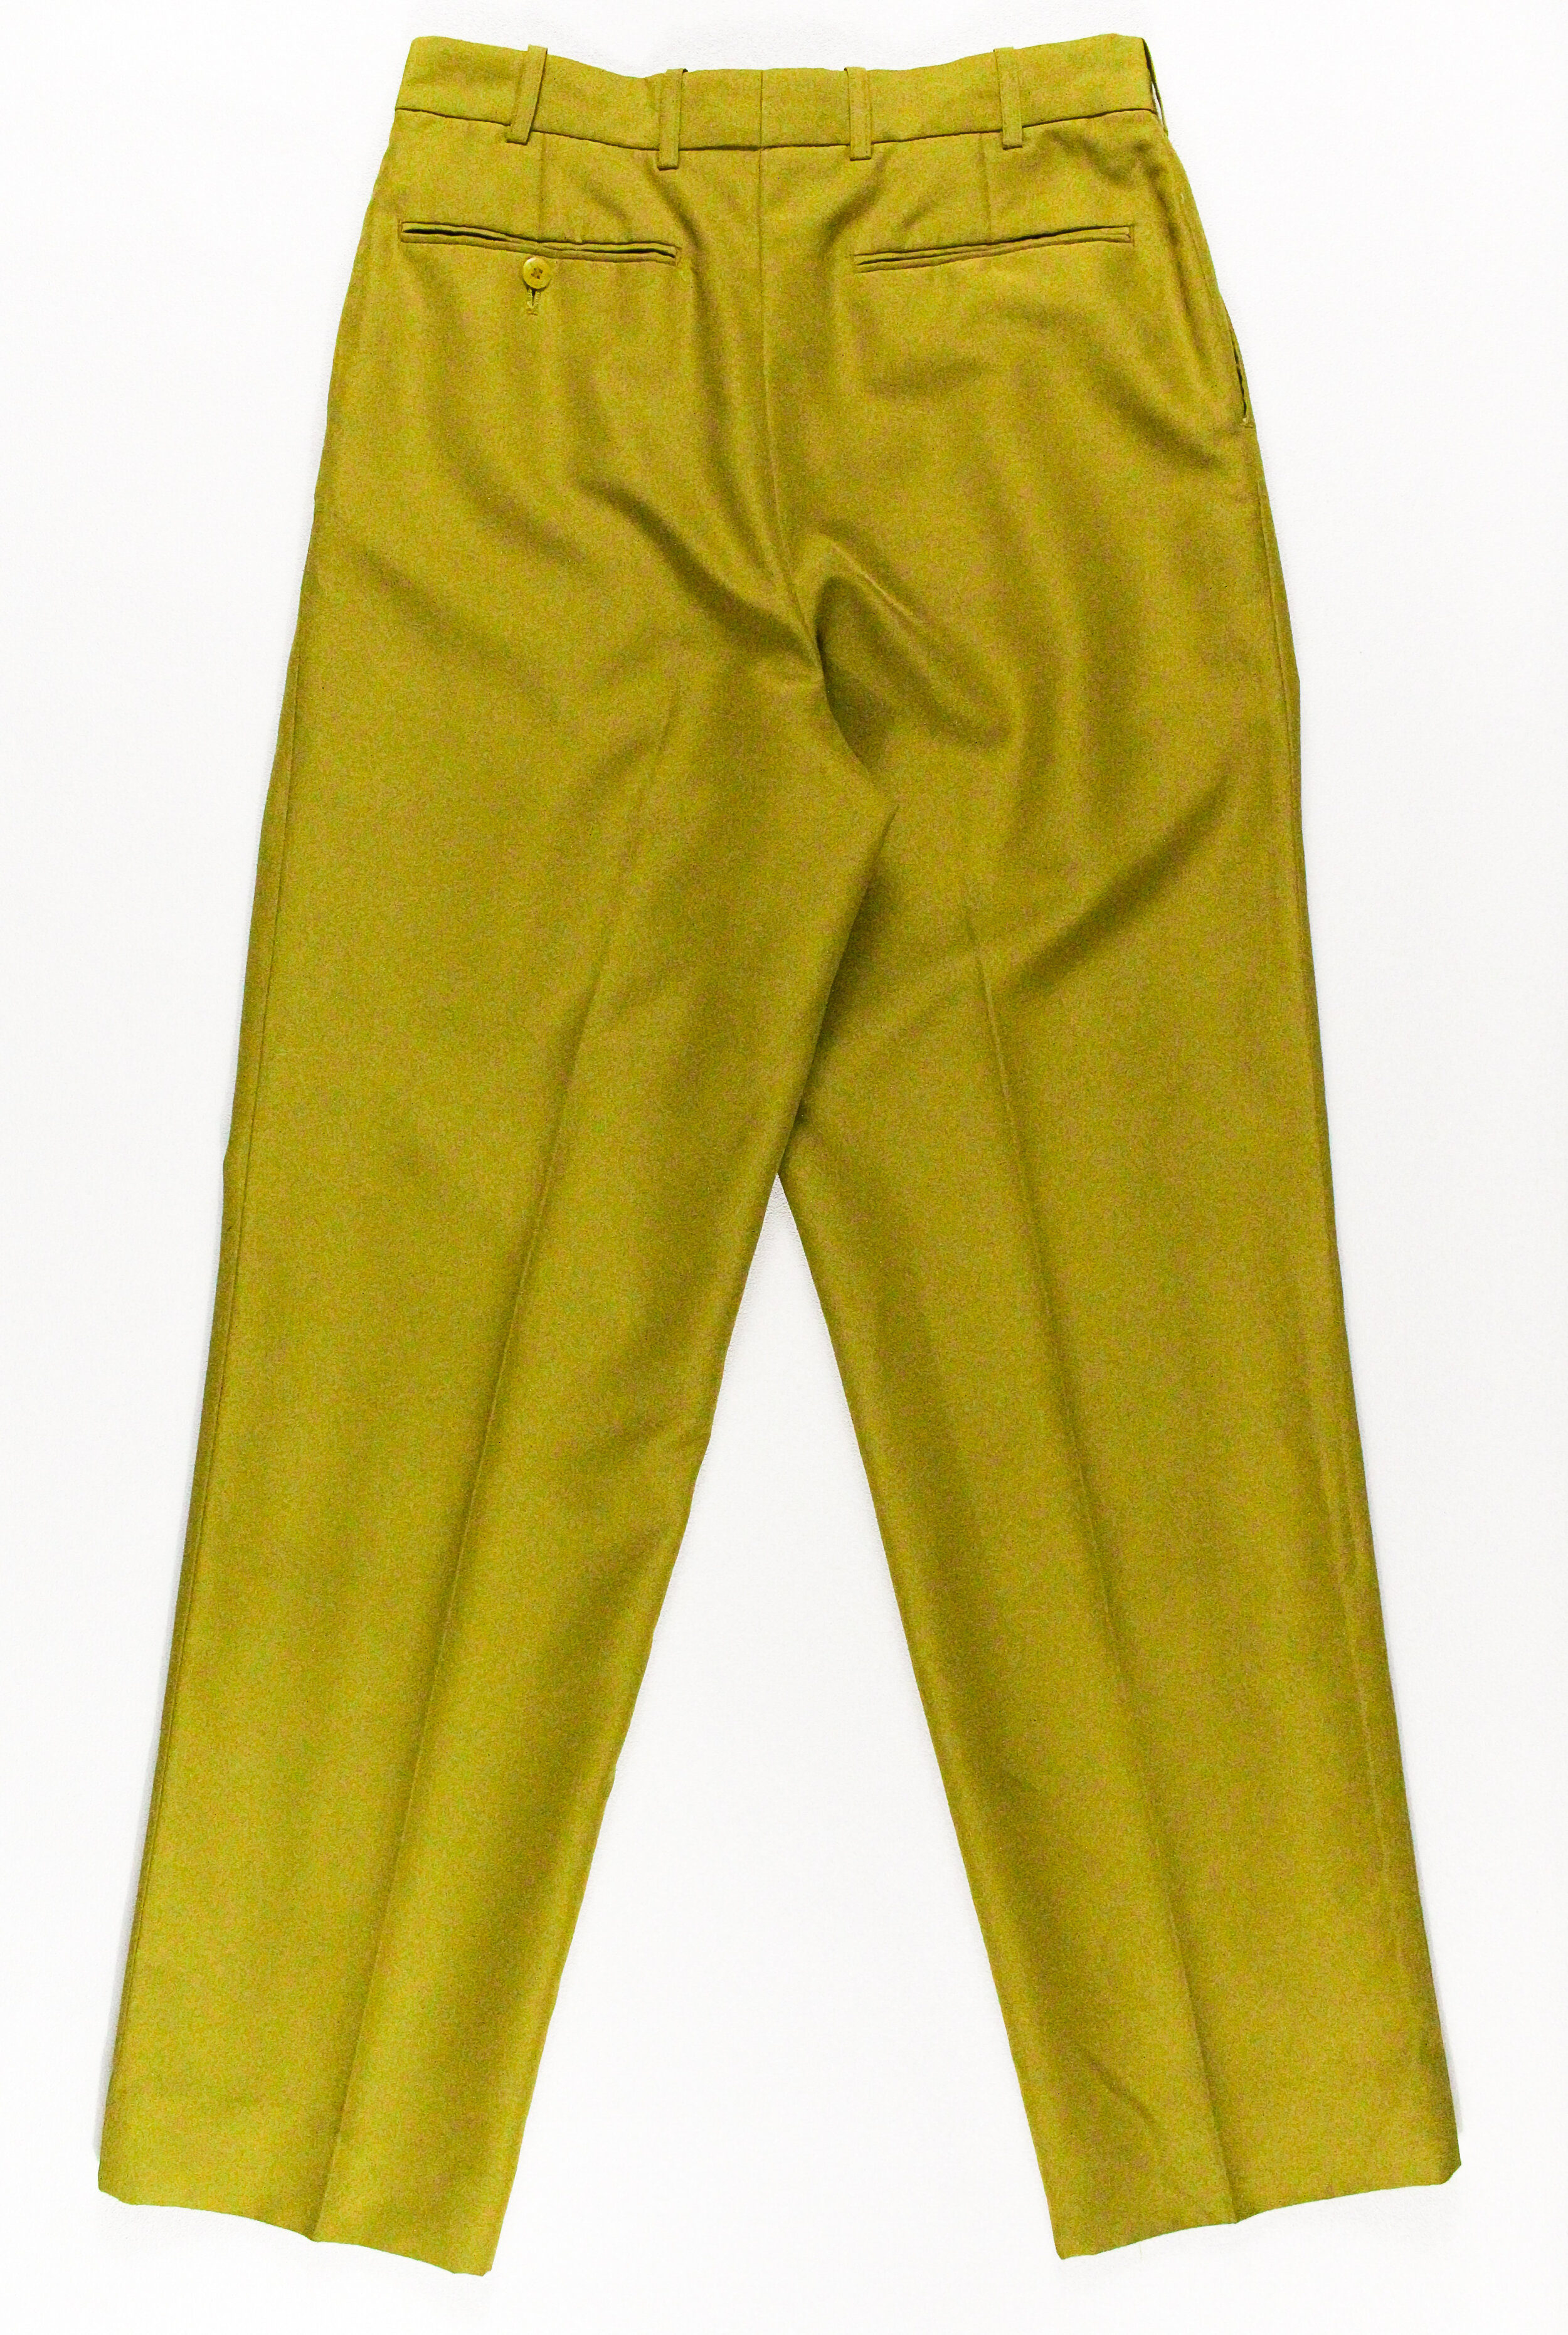 1970s Dino Divinci Chartreuse Trousers — TRASH